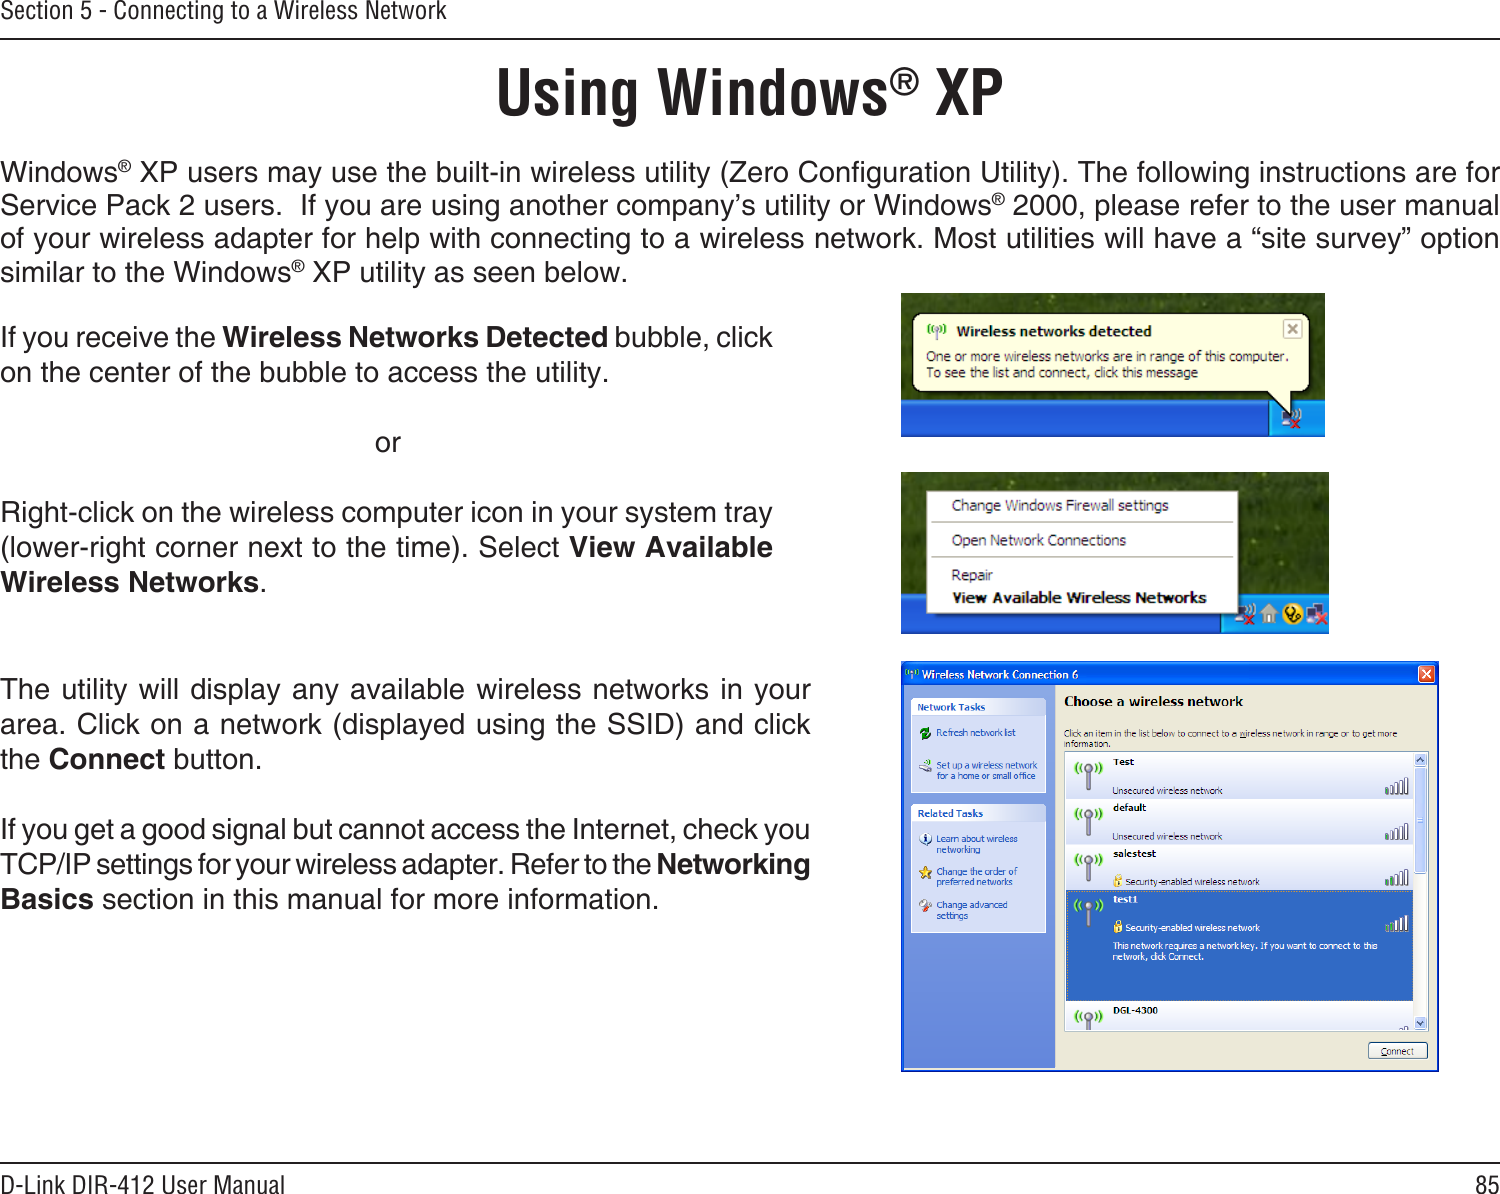 85D-Link DIR-412 User ManualSection 5 - Connecting to a Wireless NetworkUsing Windows® XPWindows® XP users may use the built-in wireless utility (Zero Conguration Utility). The following instructions are for Service Pack 2 users.  If you are using another company’s utility or Windows® 2000, please refer to the user manual of your wireless adapter for help with connecting to a wireless network. Most utilities will have a “site survey” option similar to the Windows® XP utility as seen below.If you receive the Wireless Networks Detected bubble, click on the center of the bubble to access the utility.     orRight-click on the wireless computer icon in your system tray (lower-right corner next to the time). Select View Available Wireless Networks.The utility will display any available wireless networks in your area. Click on a network (displayed using the SSID) and click the Connect button.If you get a good signal but cannot access the Internet, check you TCP/IP settings for your wireless adapter. Refer to the Networking Basics section in this manual for more information.